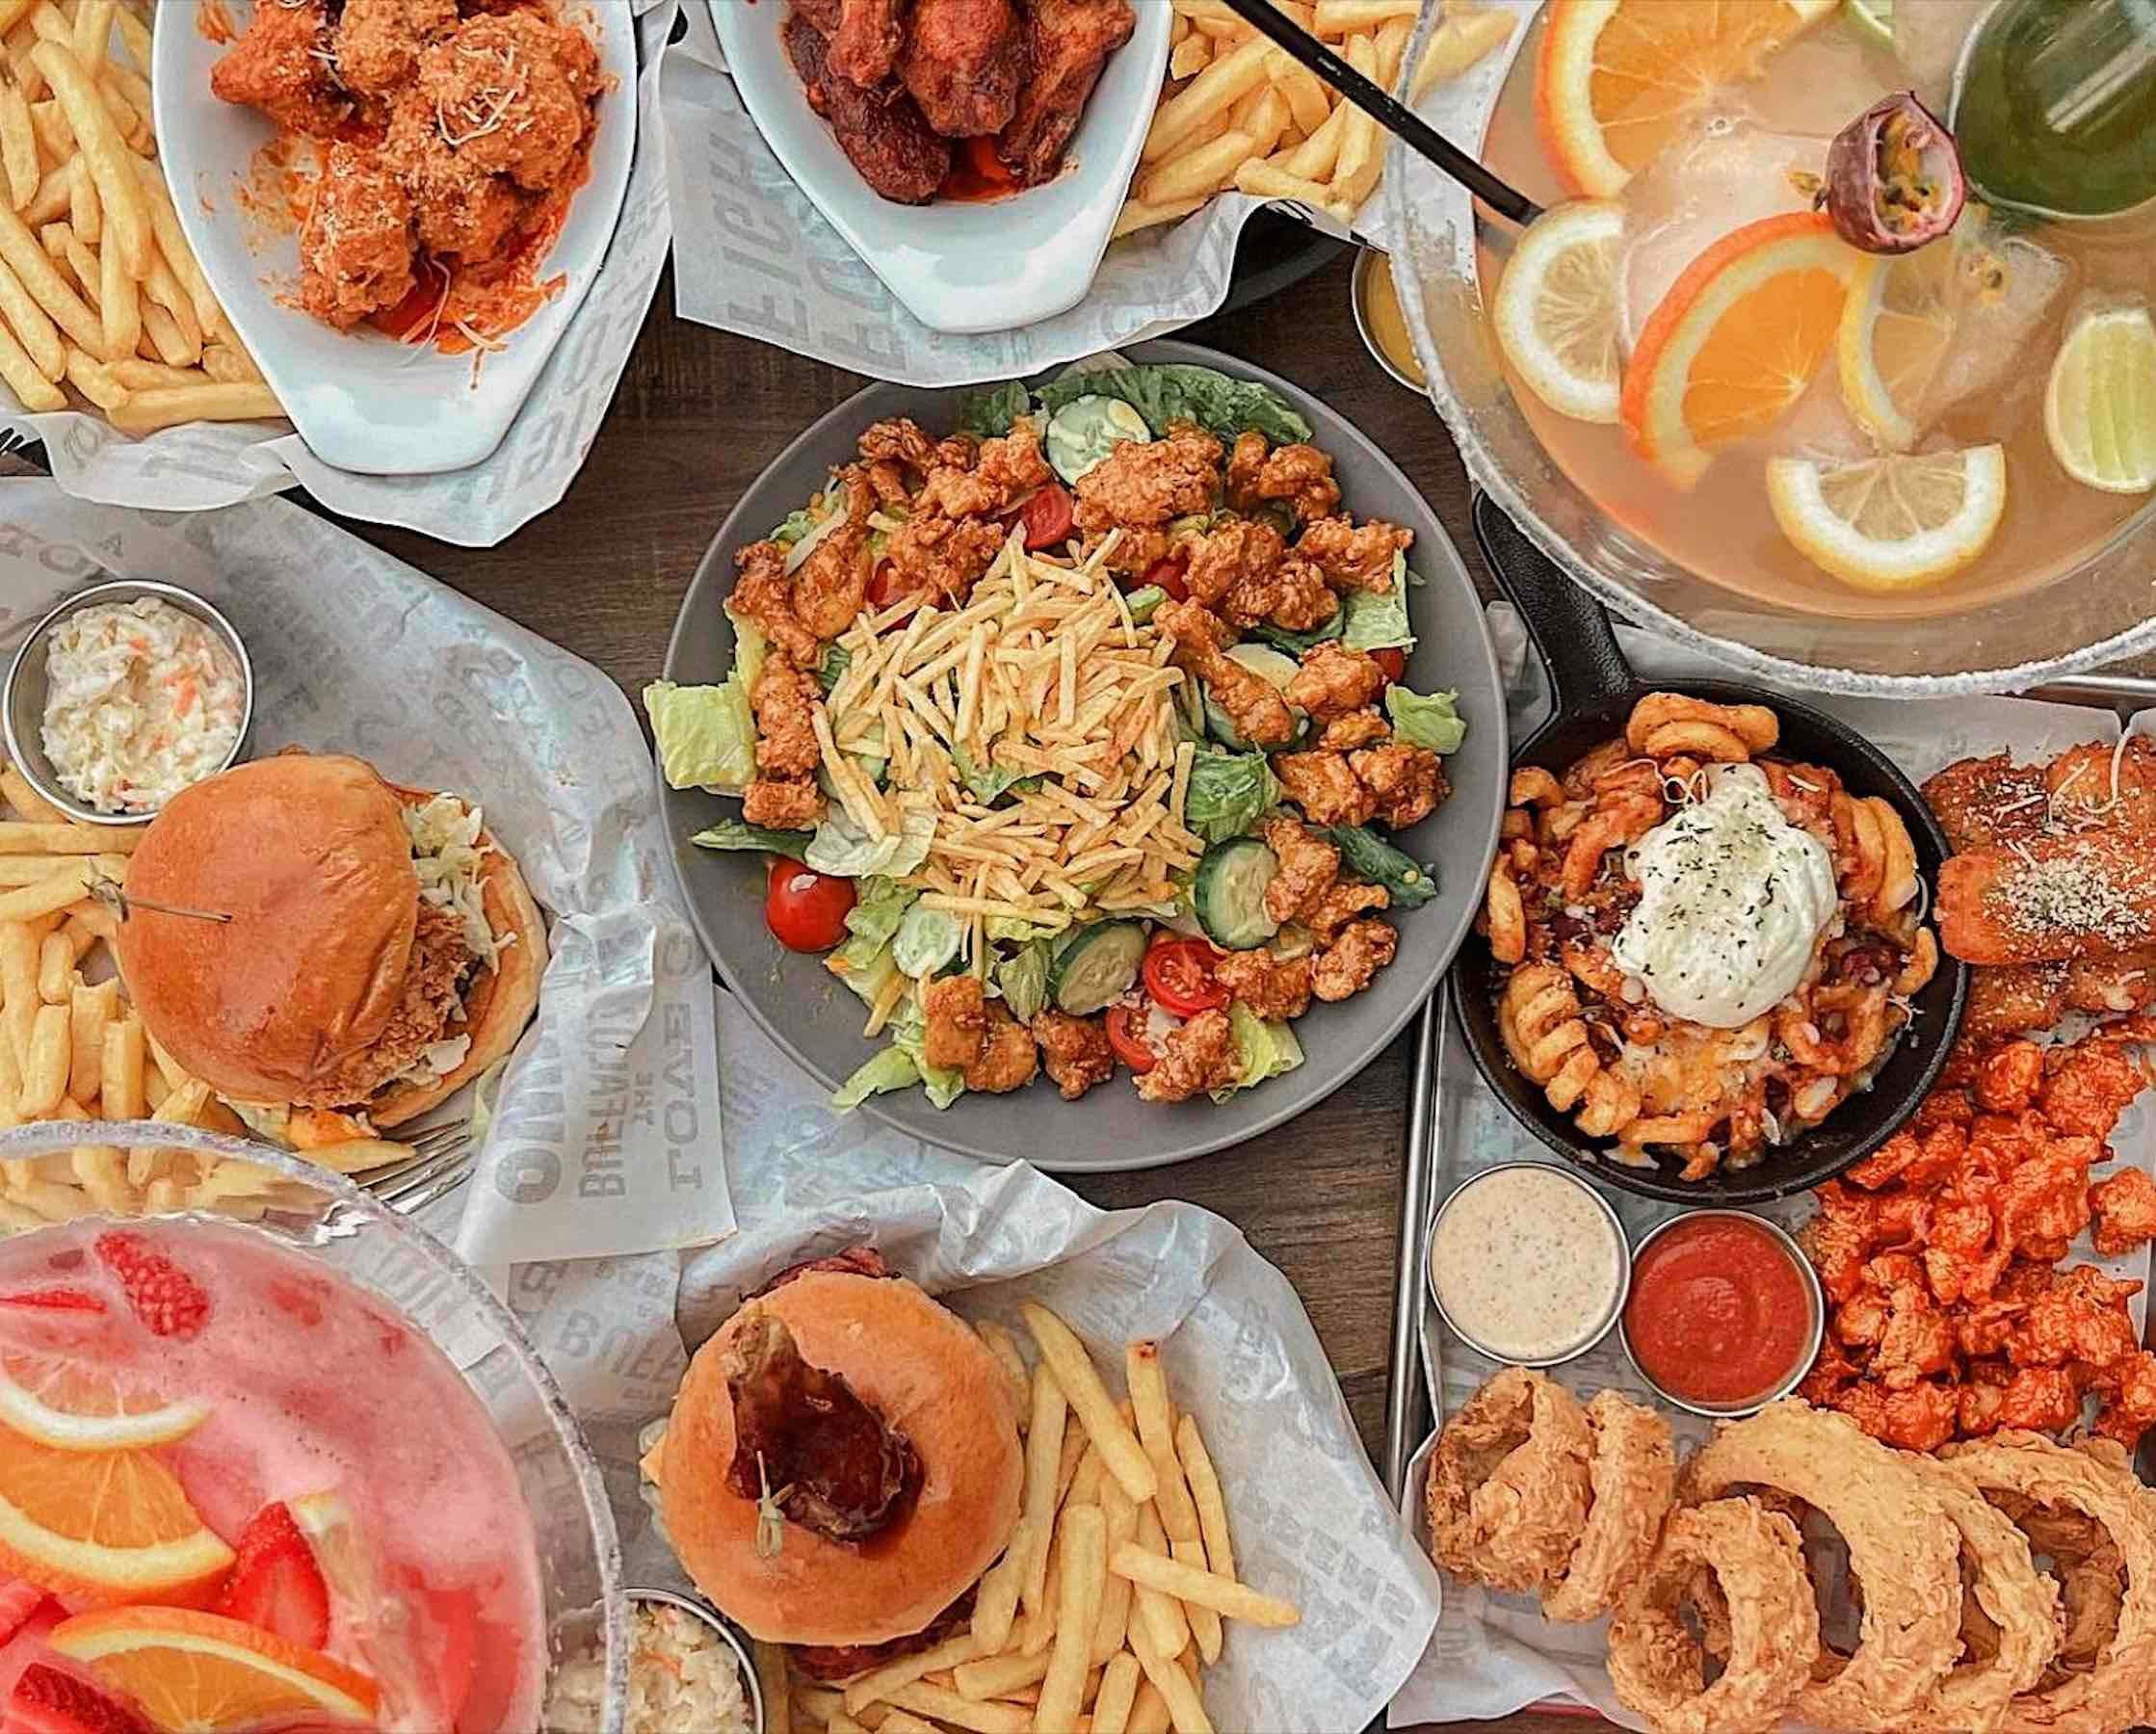 Buffalo Wings &#038; Rings introduces 9 sizzling summer offers